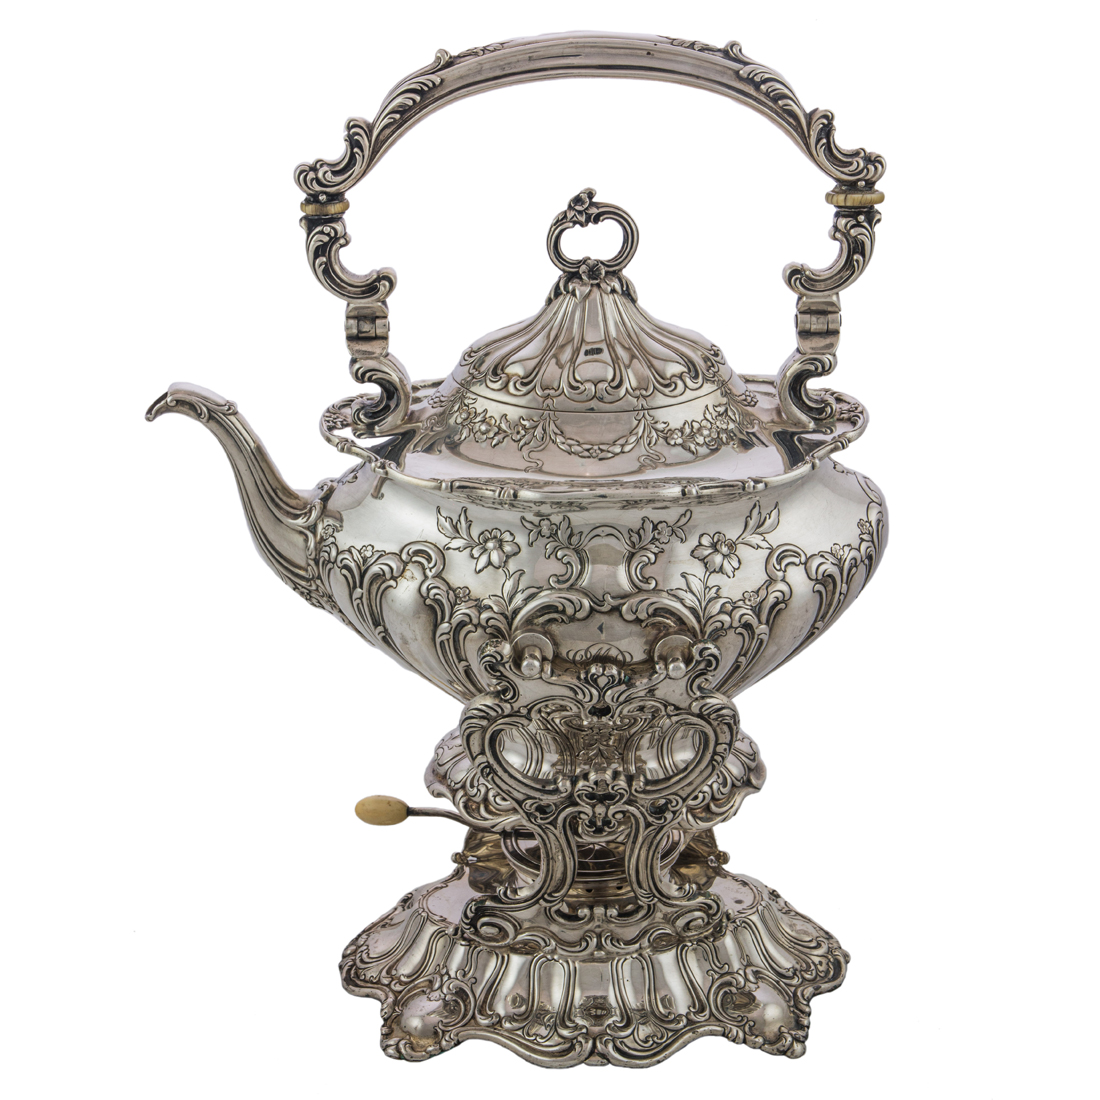 A GORHAM ROCOCO REVIVAL STERLING